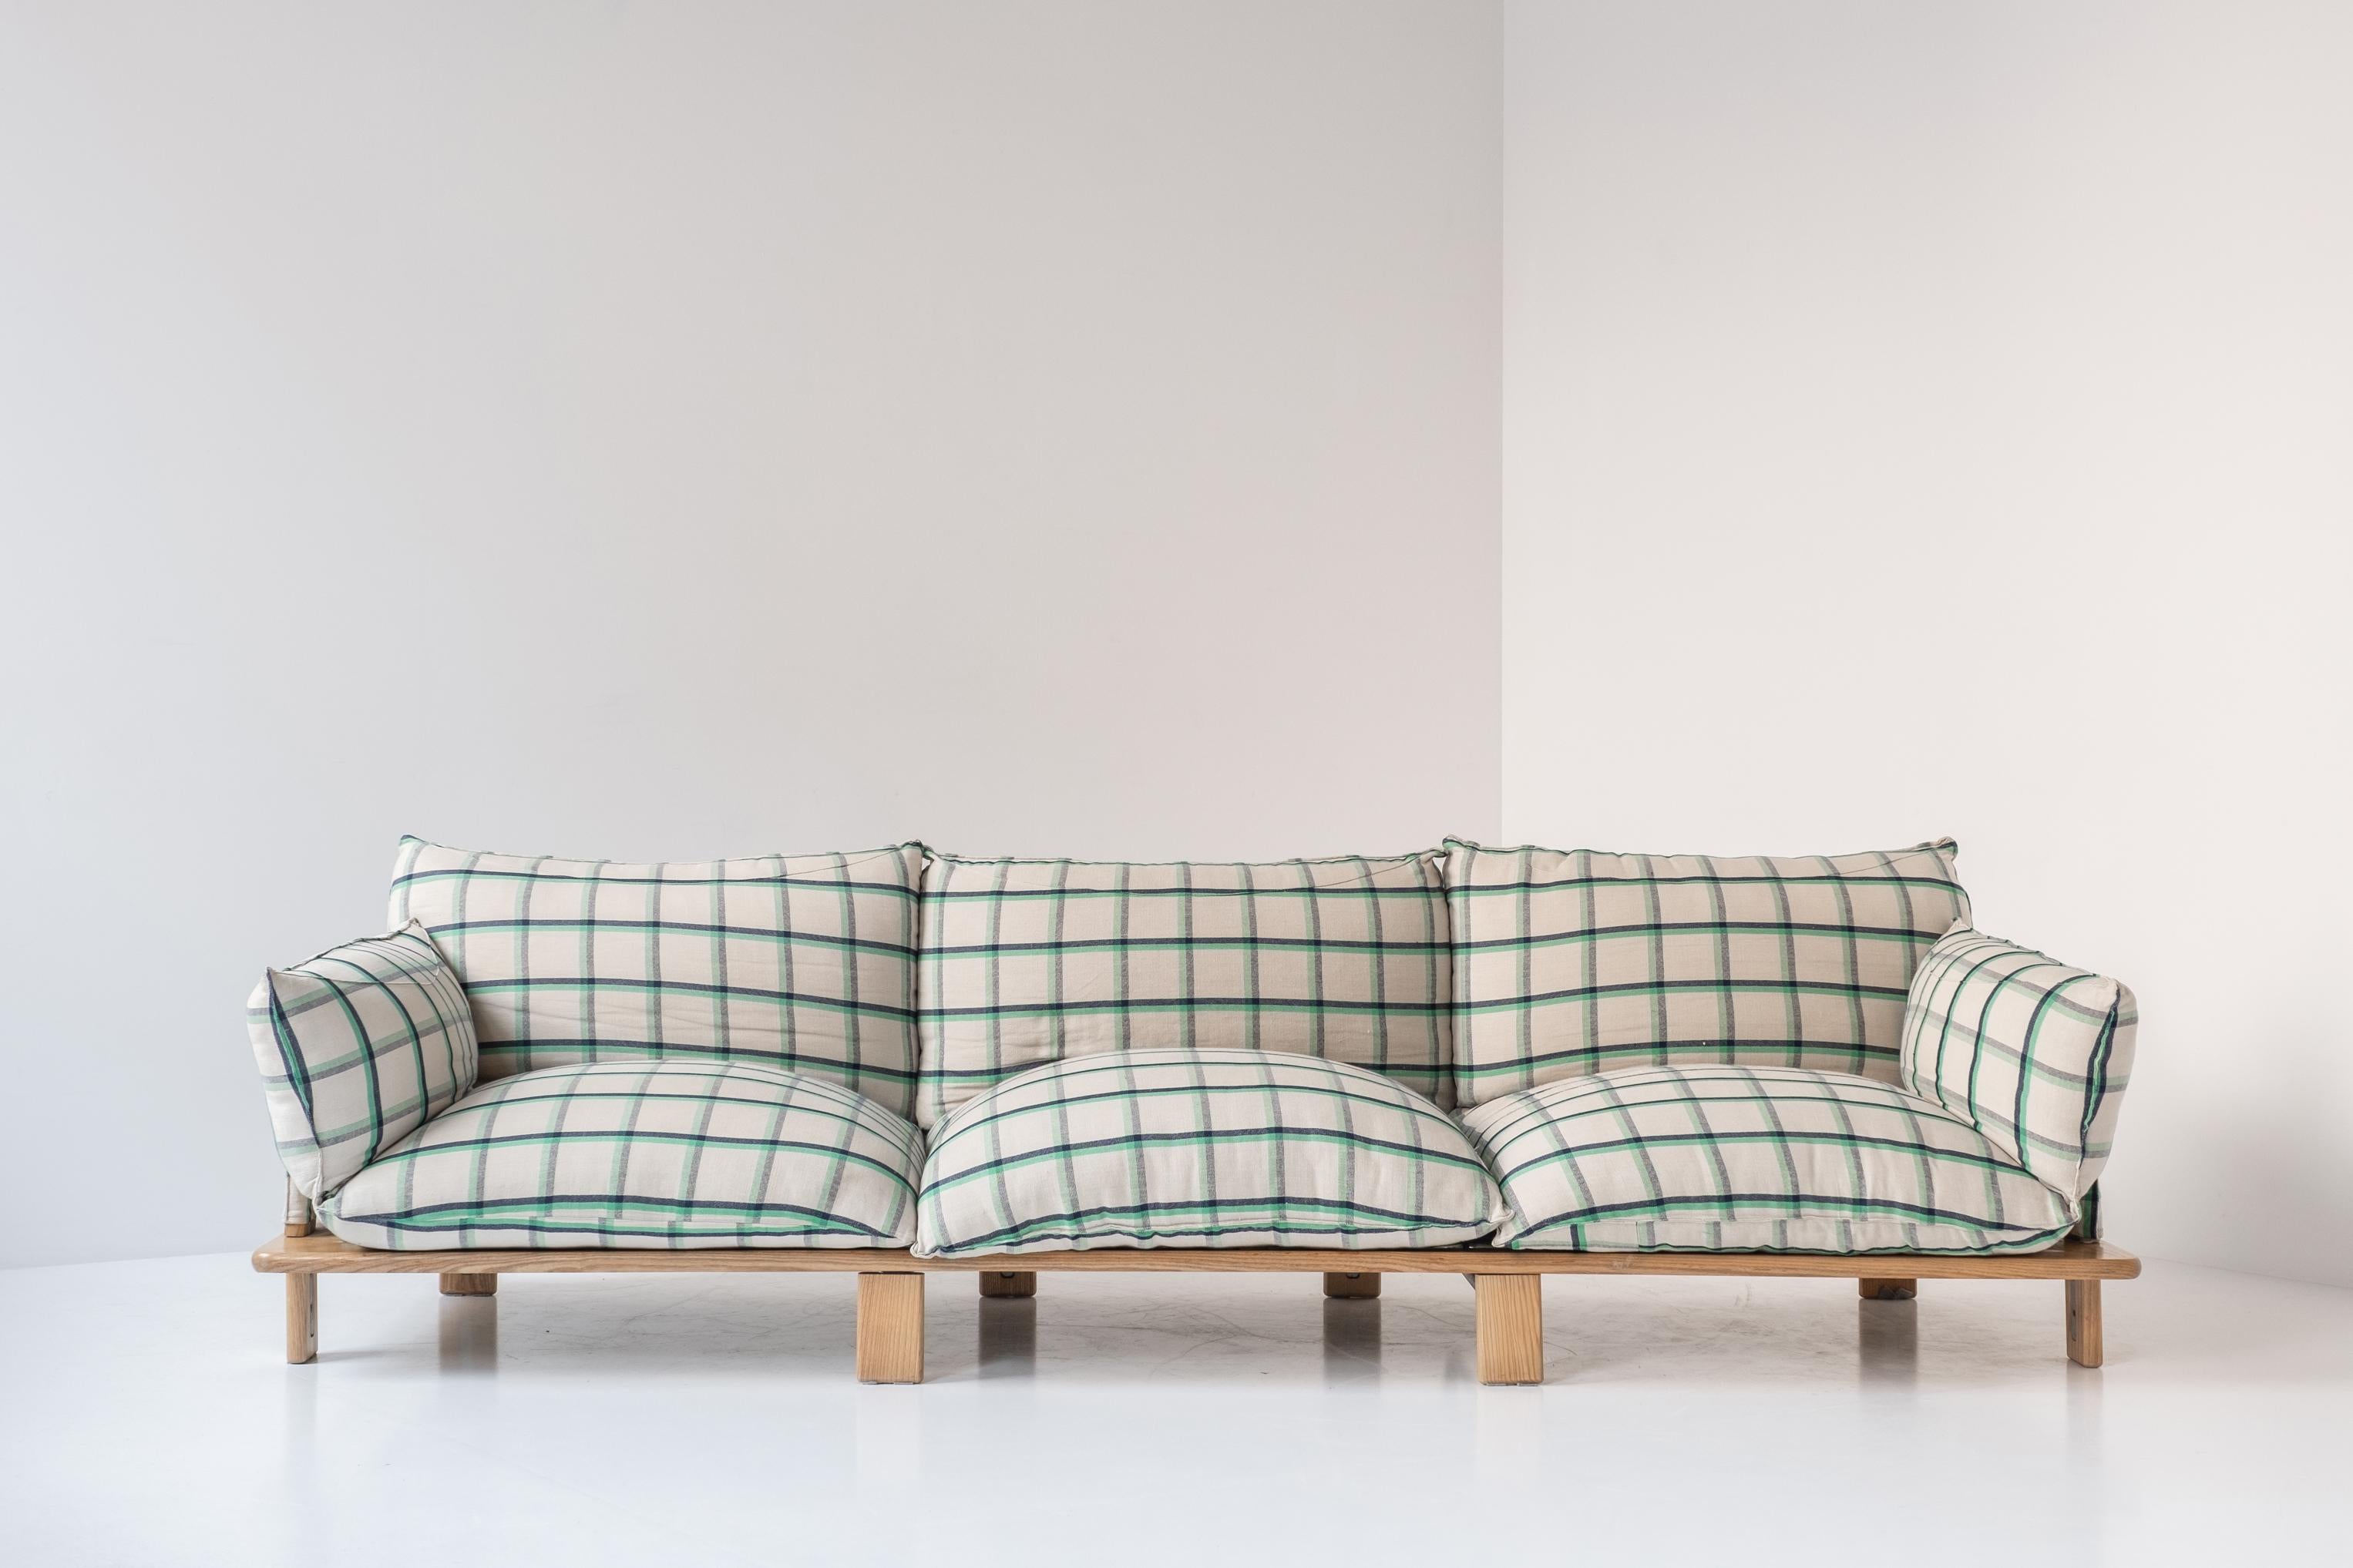 Very rare three seater sofa by Giovanni Offredi for Saporiti, Italy 1970s. This sofa features a frame made out of ash wood and features still the original cotton fabric upholstery. Extremely comfortable sofa in a lovely upholstery. Some visible